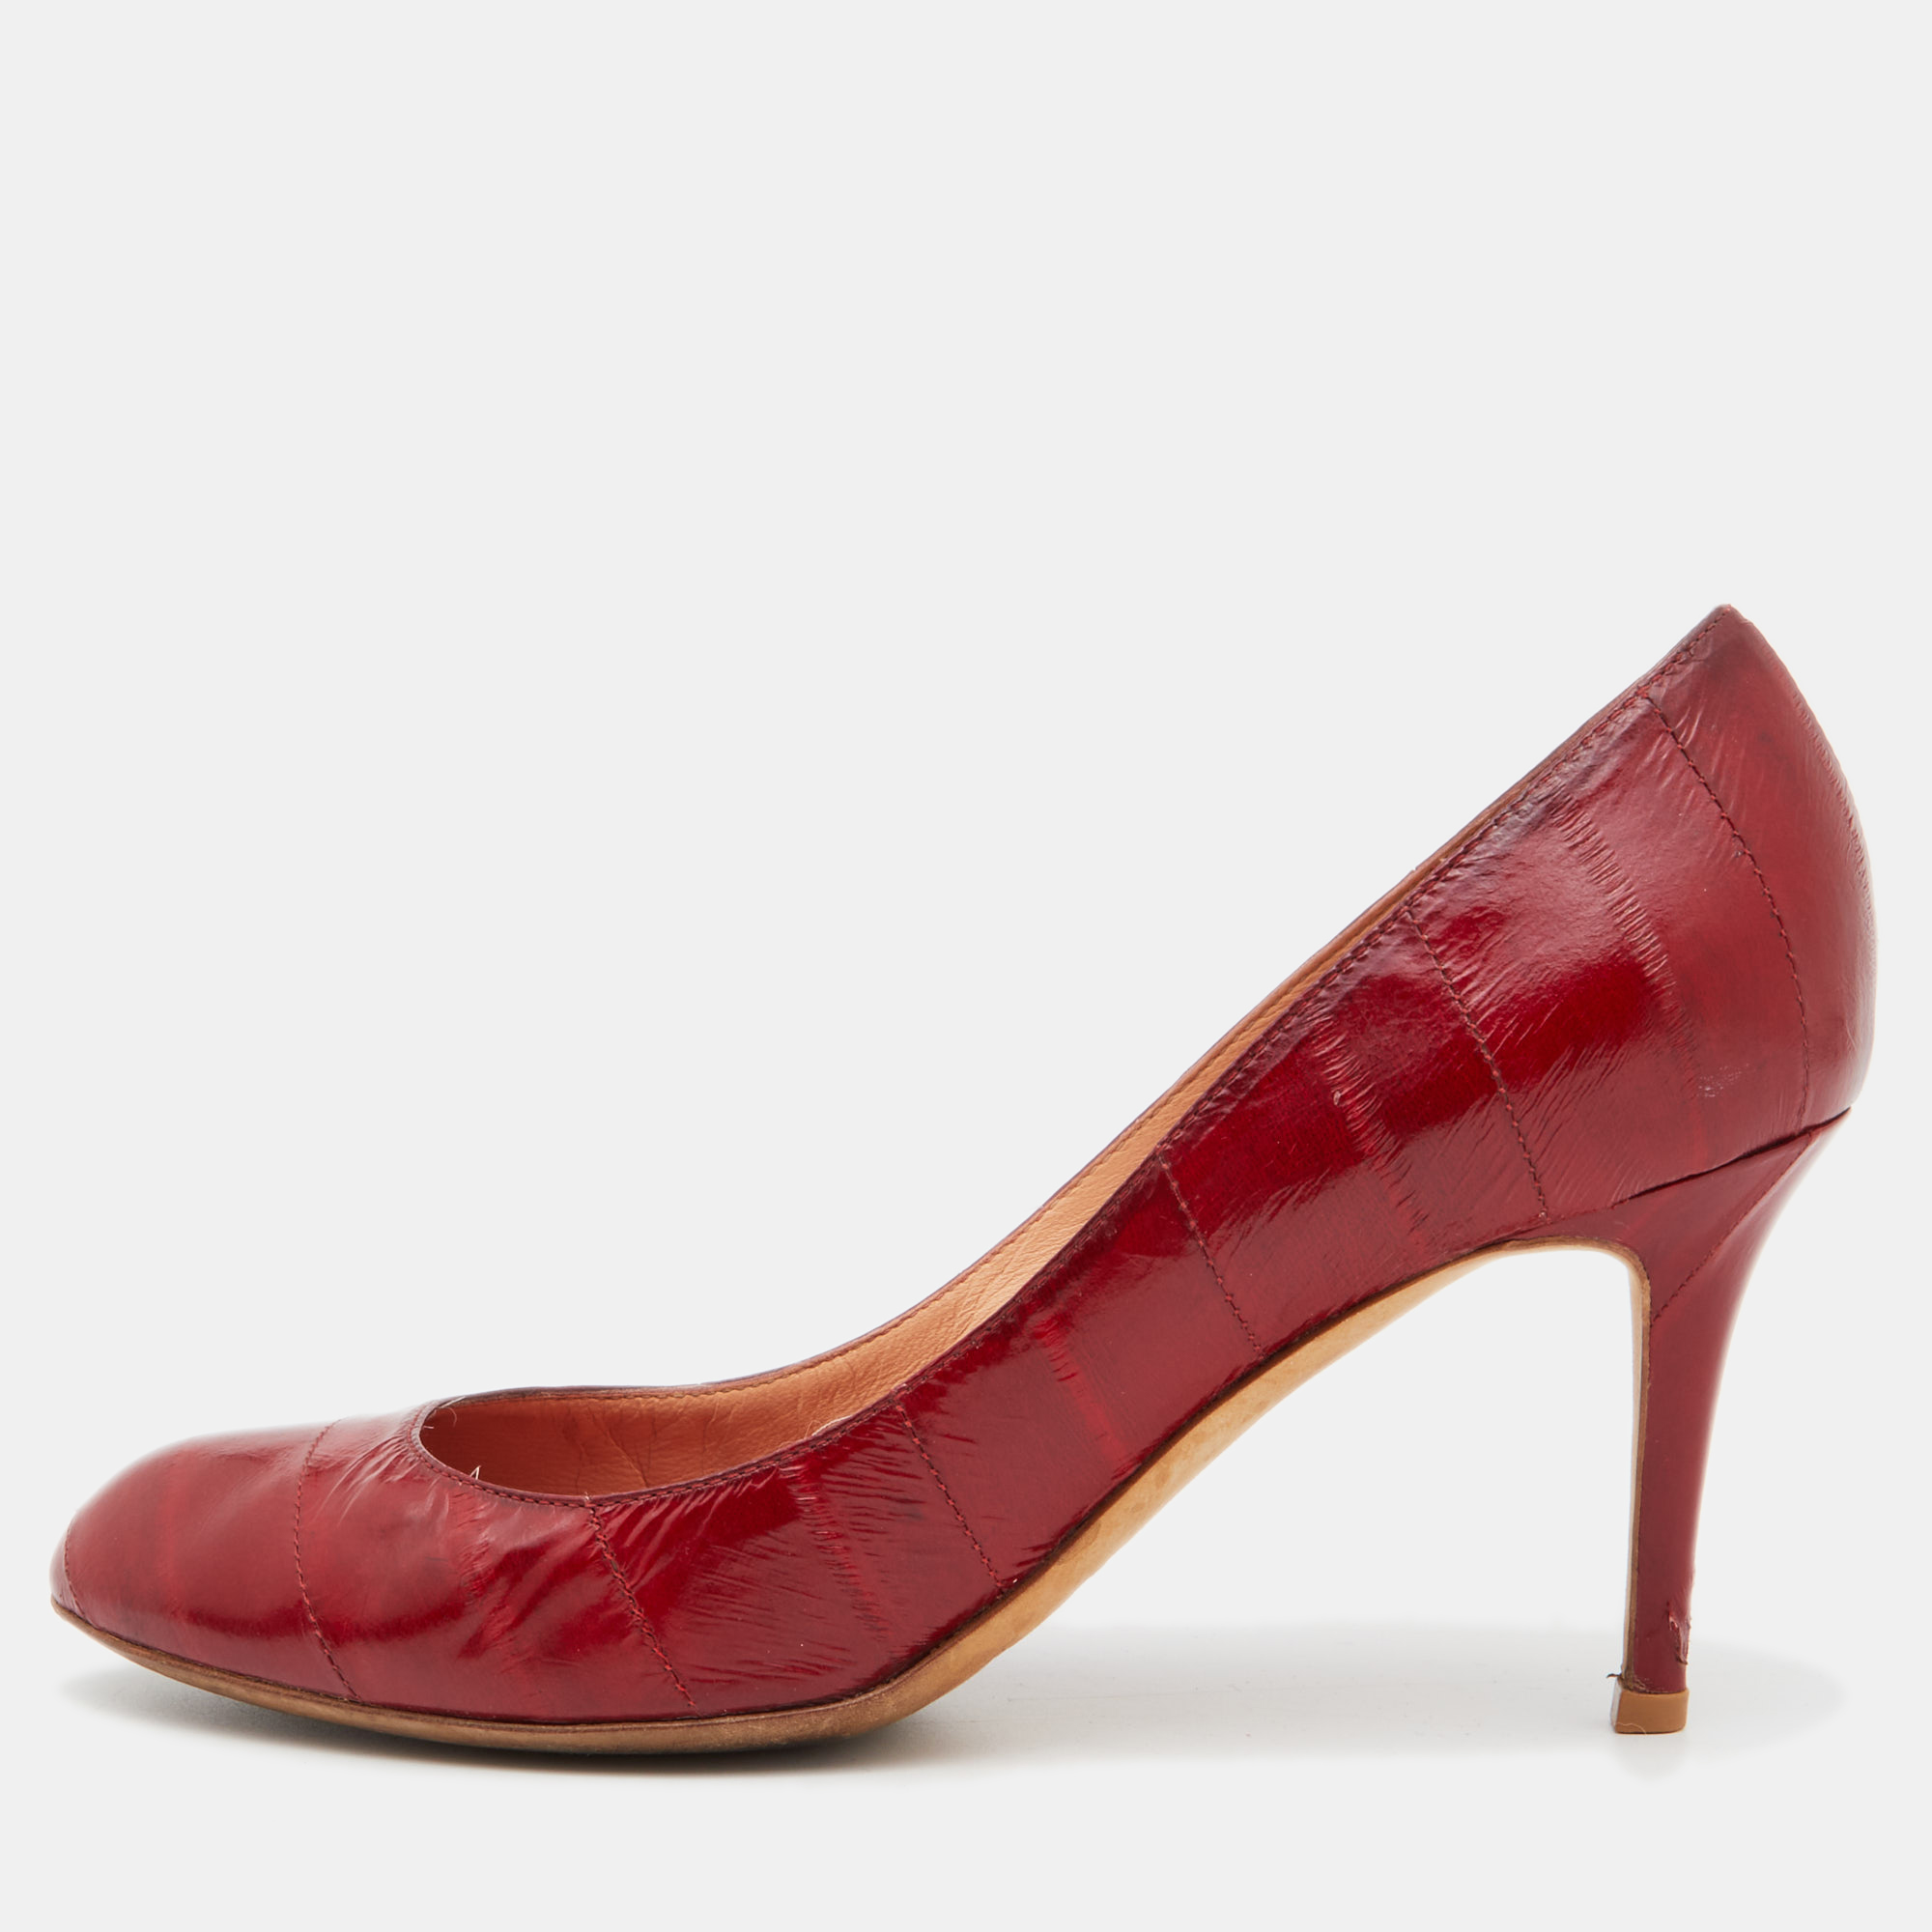 Sergio Rossi Red Eel Leather Round-Toe Pumps Size 39